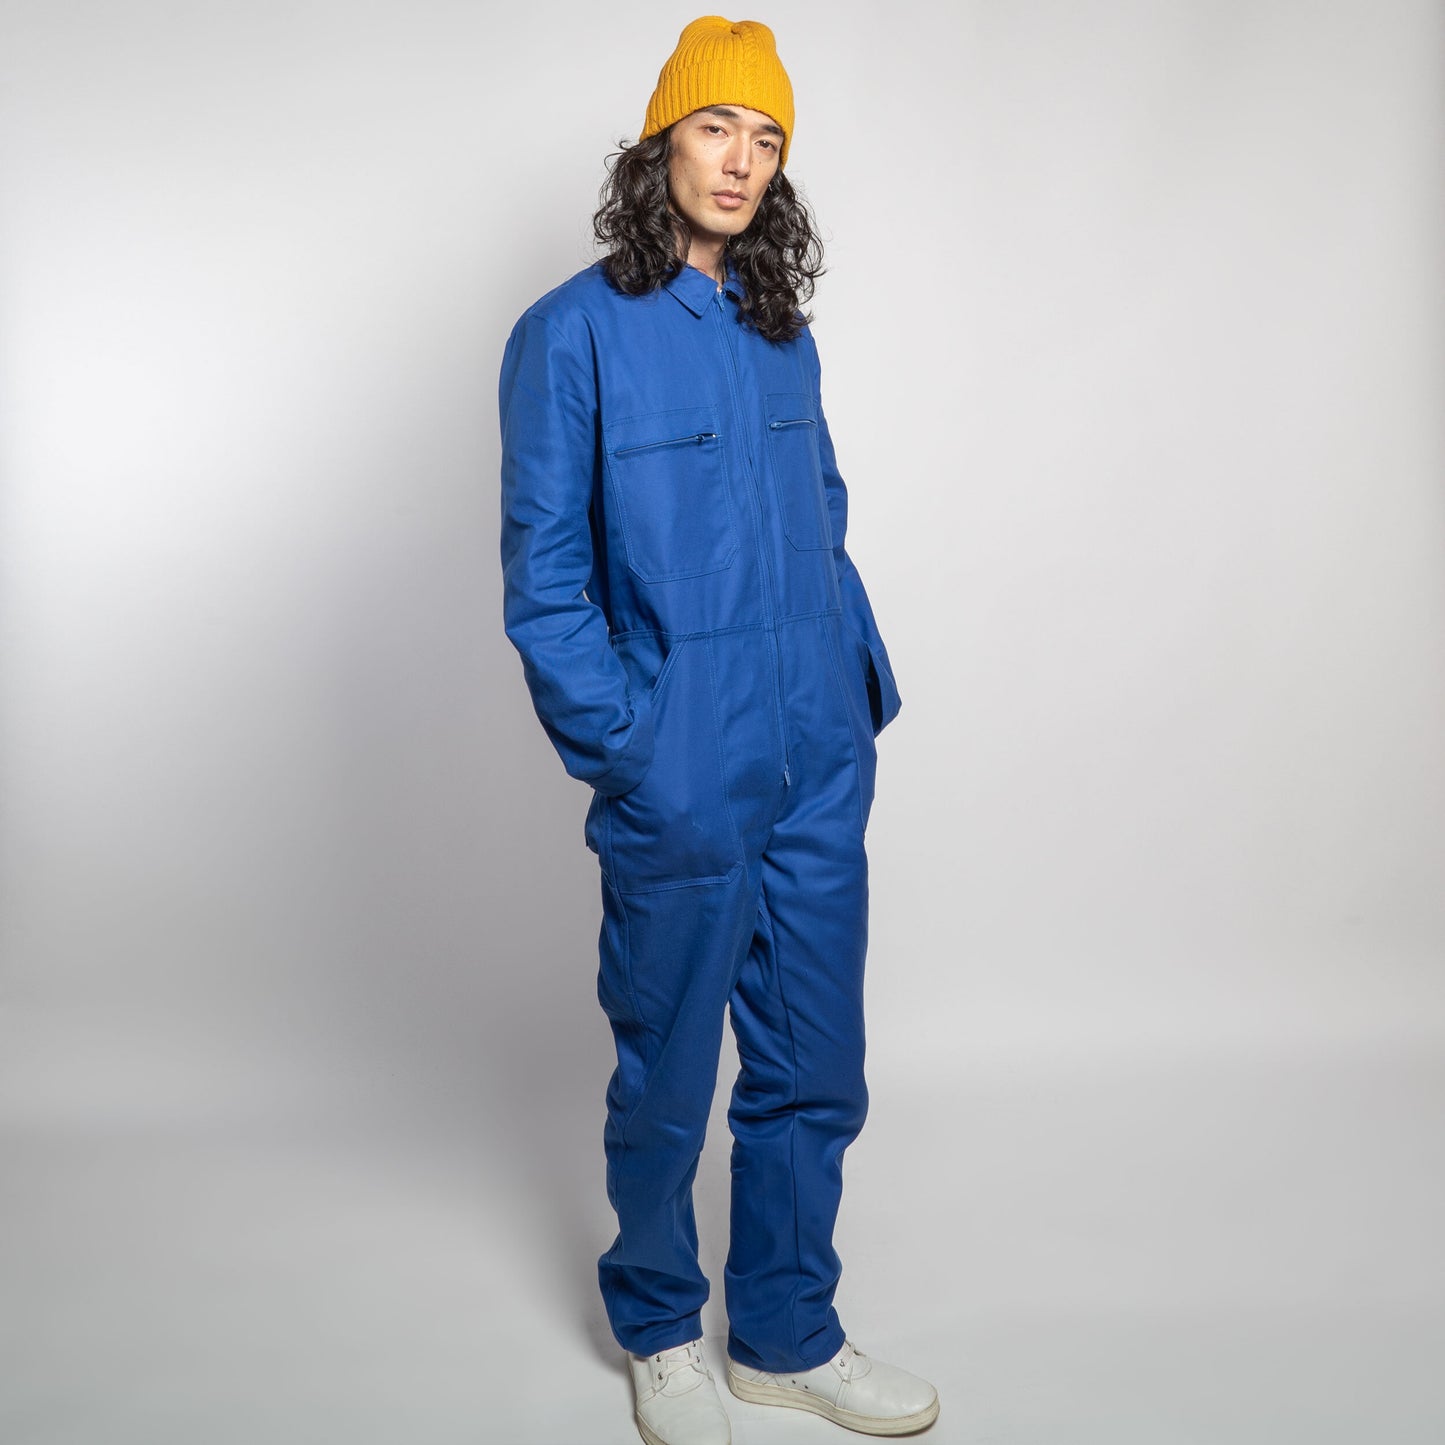 Le Laboureur French Cotton Coveralls in French Blue